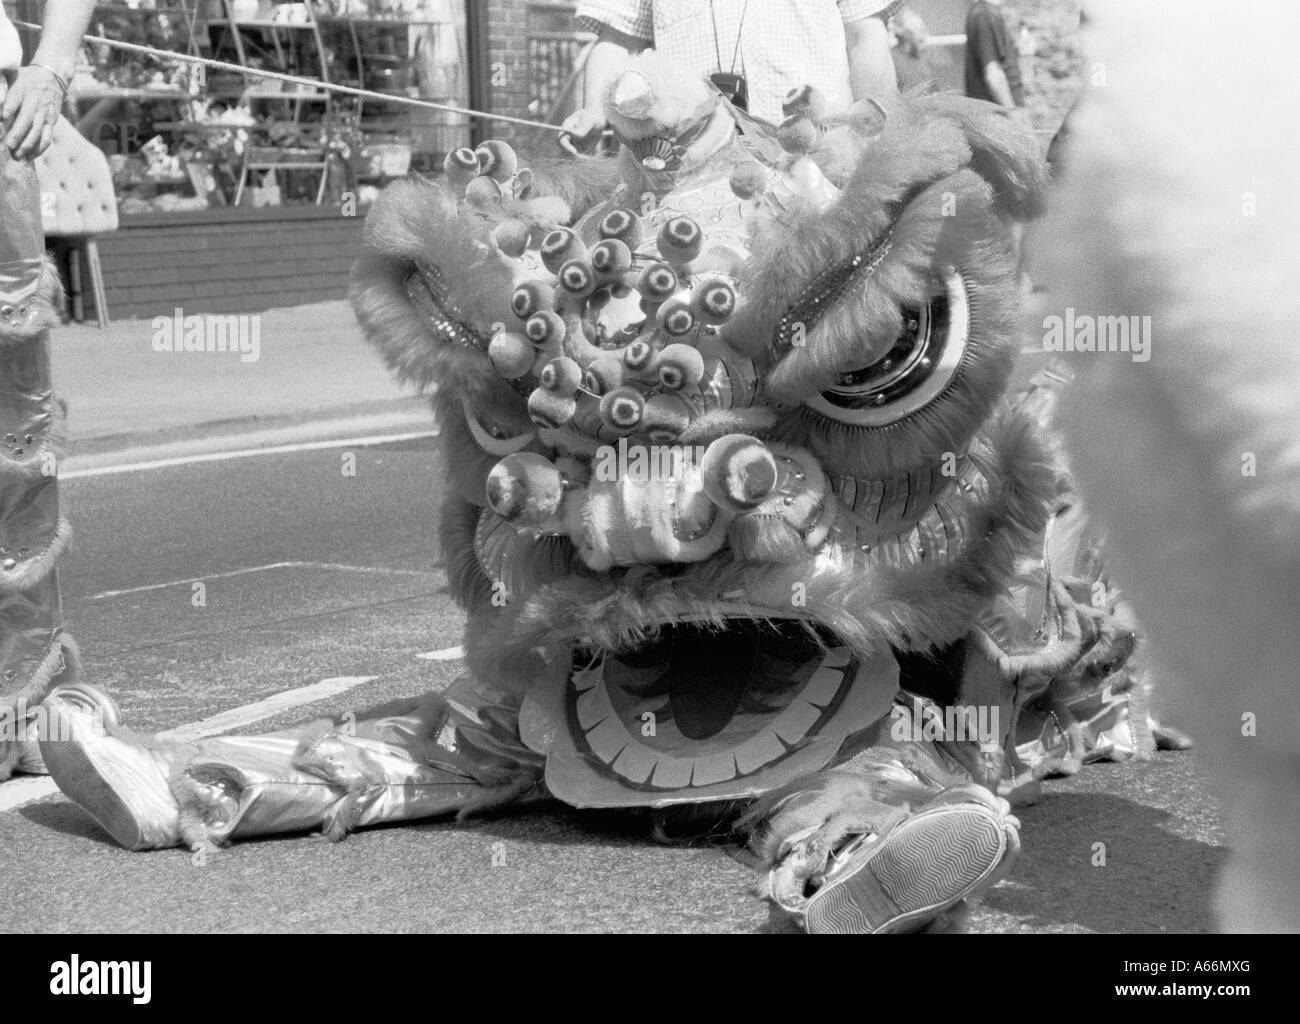 Black White Grainy Image of Exhausted Chinese Dragon Dancer Sitting in Cowley Road Carnival Procession Oxford England UK 2004 Stock Photo